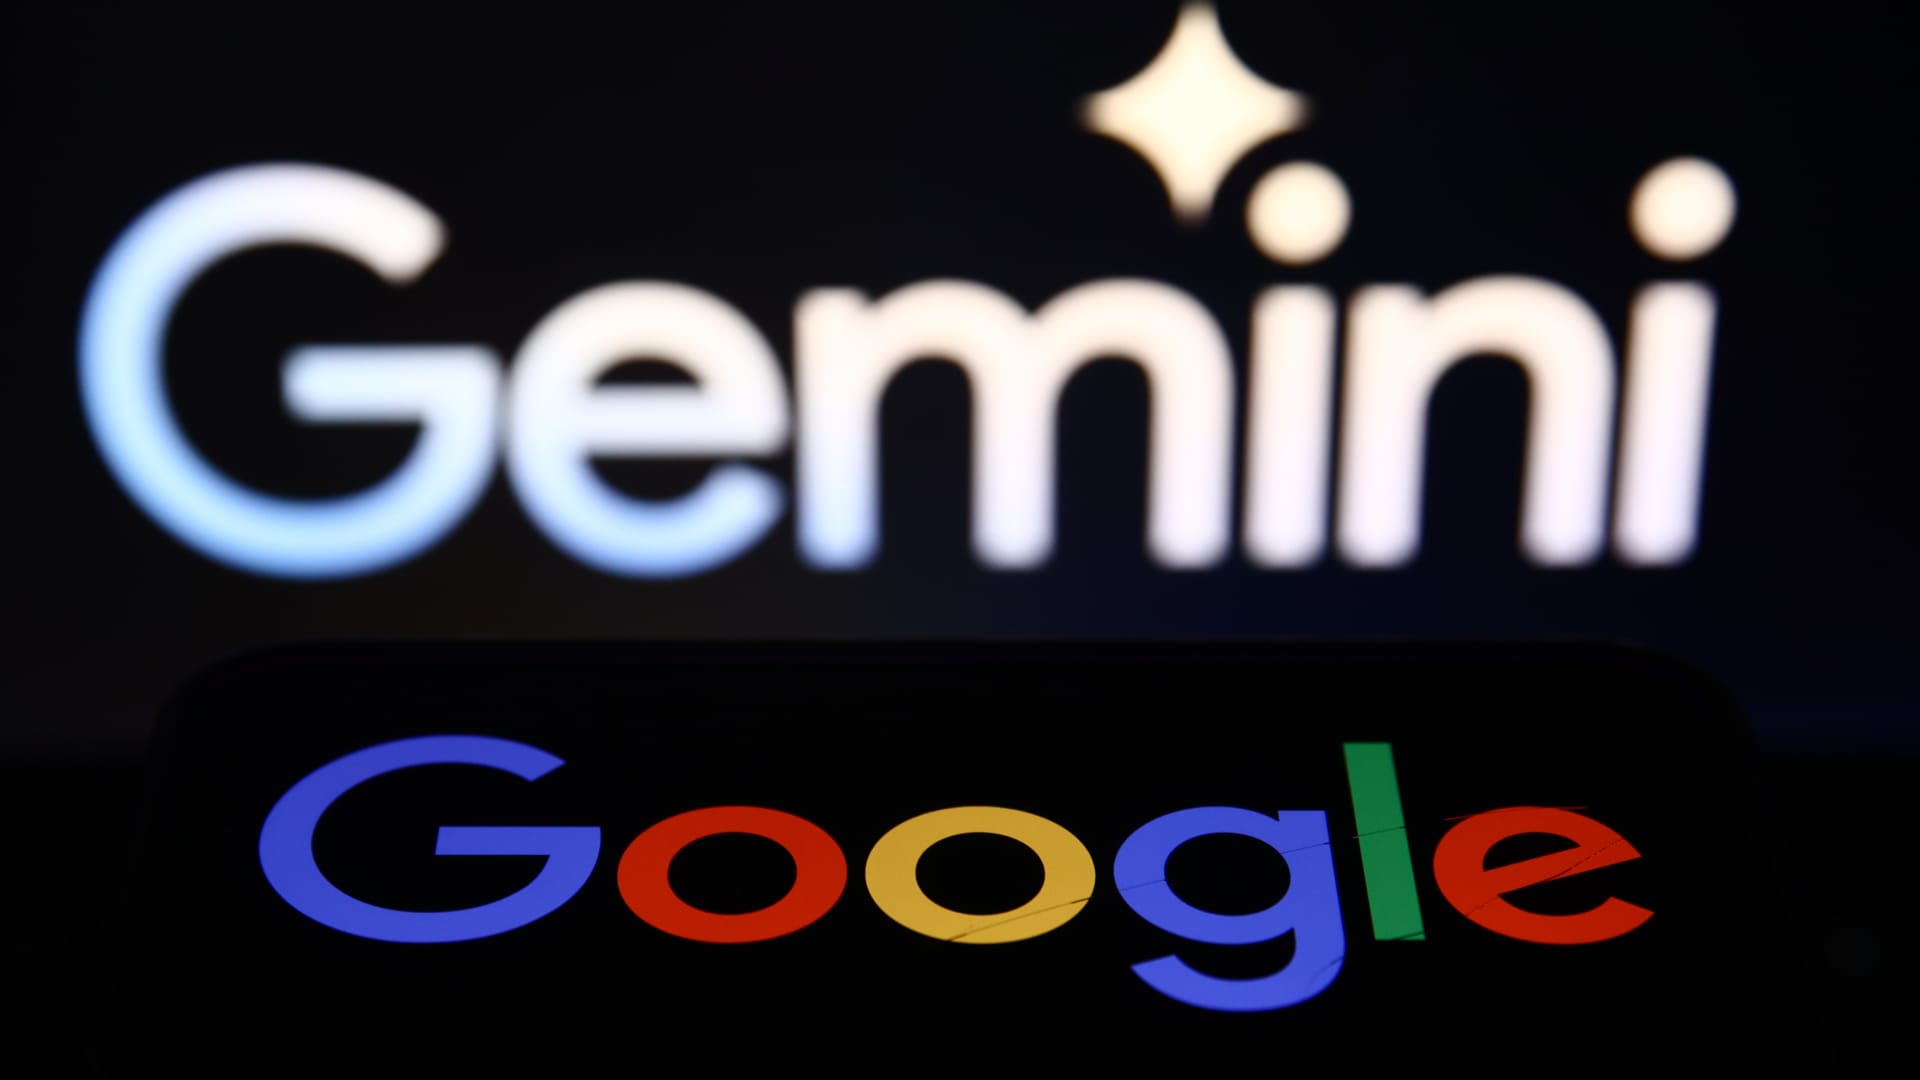 Google rebrands Bard AI to Gemini and launches a new app and subscription